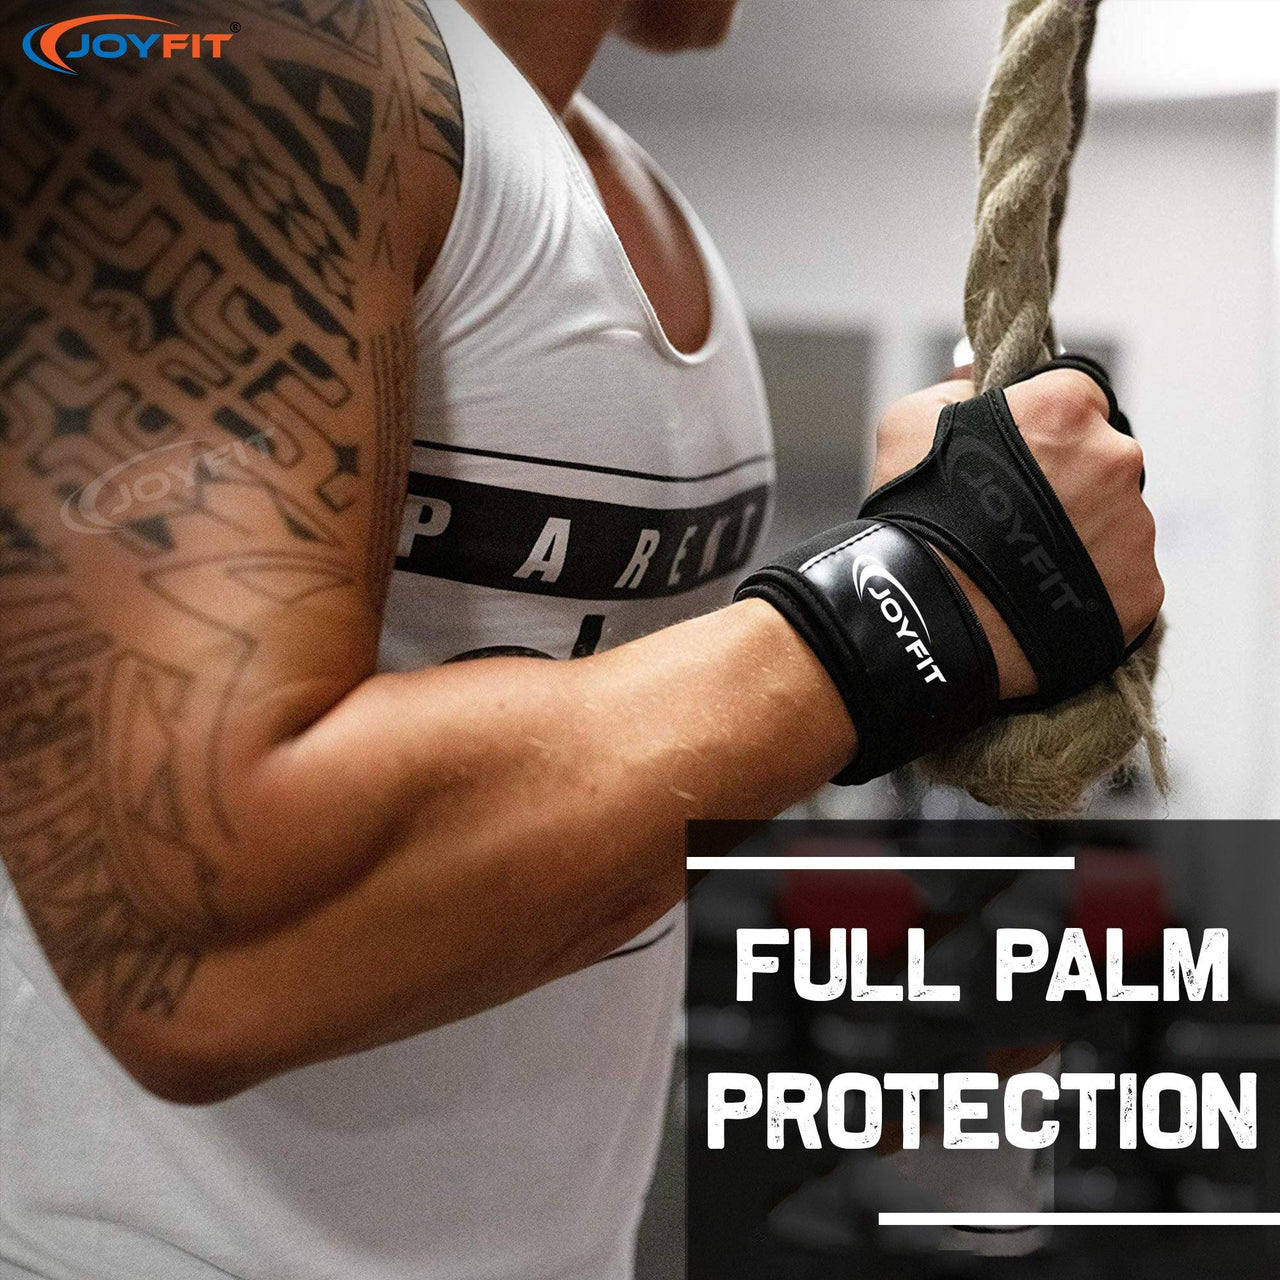 Weight Lifting Heavy Duty Gloves